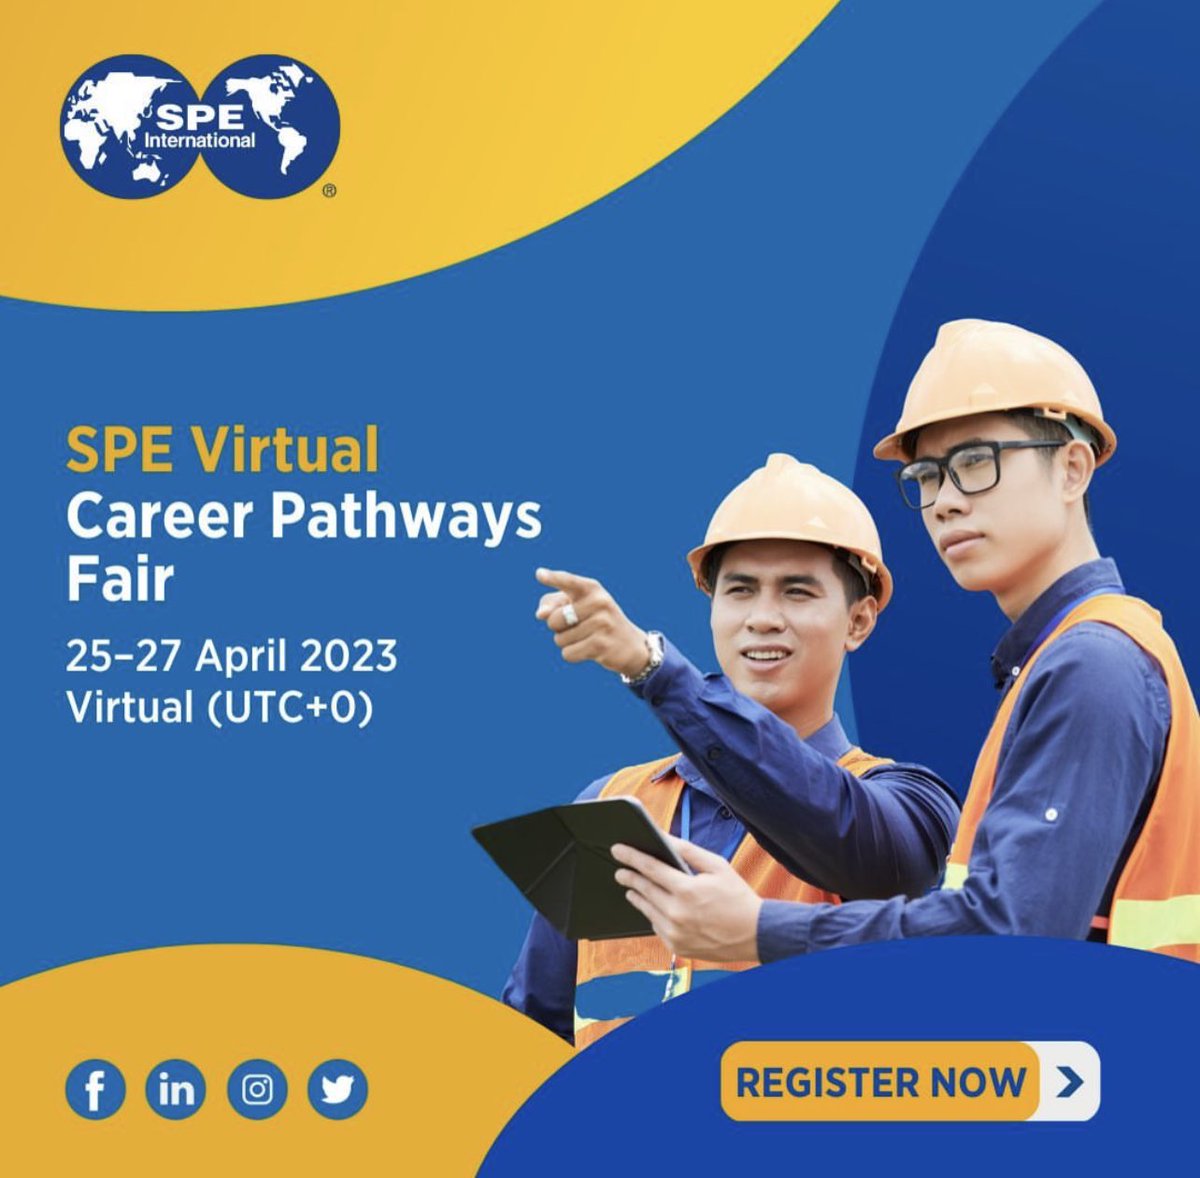 I encourage young petroleum engineers to register & benefit from this ⁦@SPEtweets⁩ Virtual Career Pathways Fair. I am grateful that God Has used SPE to add value to my career as a petroleum engineer. You too can learn a lot.

#WeAreSPE #technologythatfuelstheworld